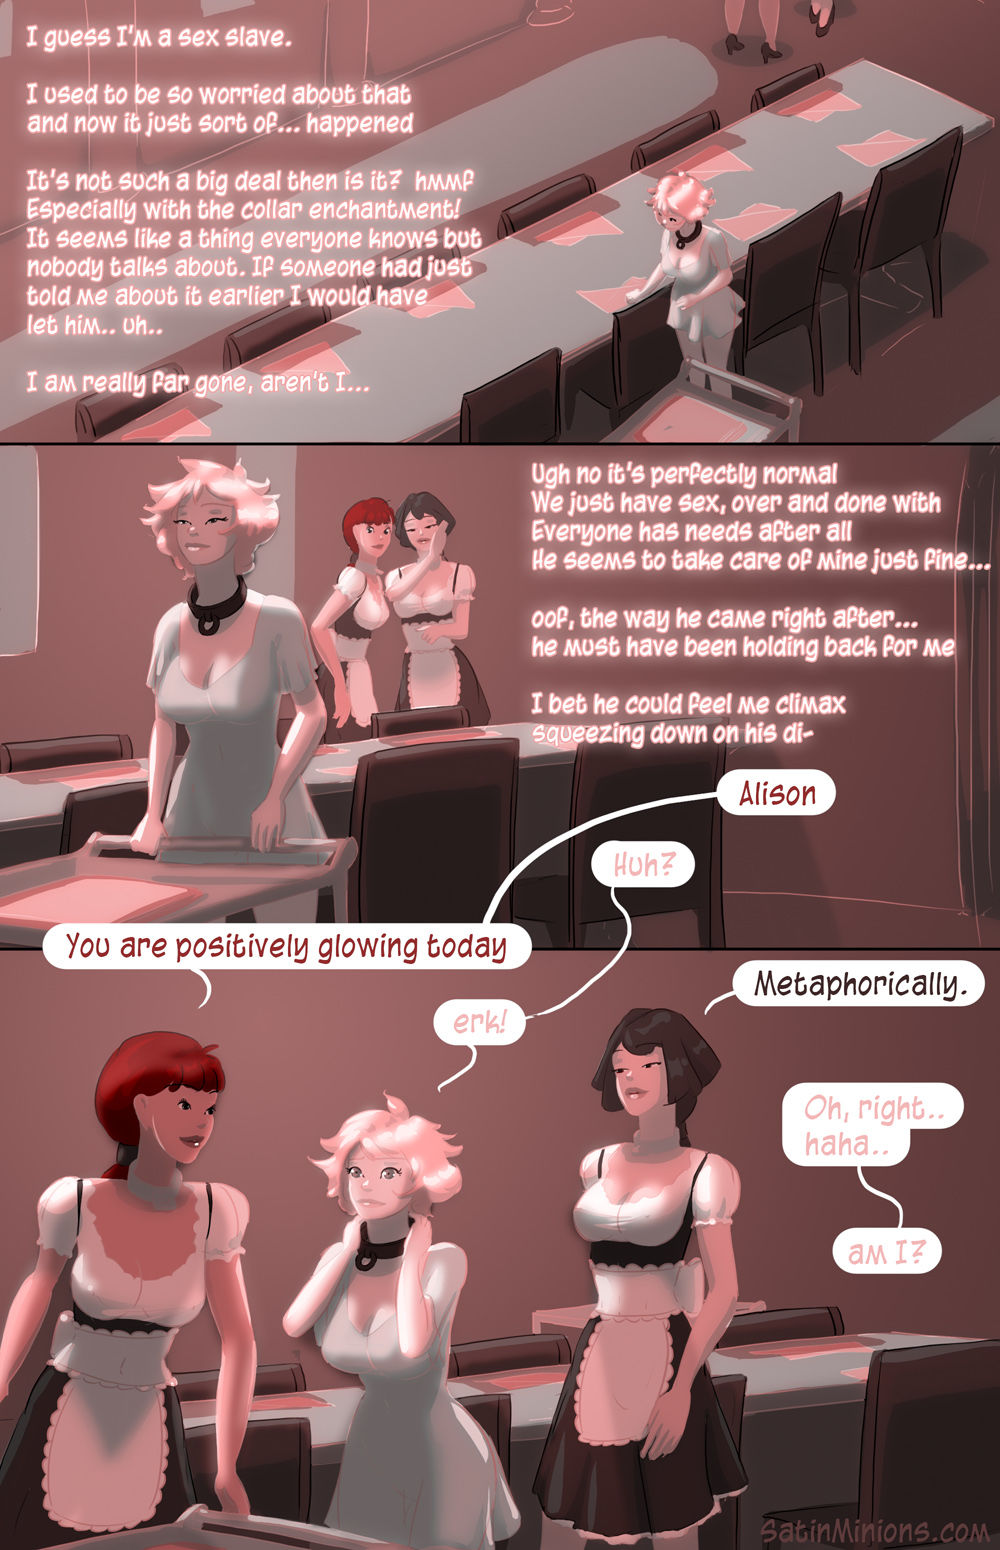 Lighter Chains Vol 6 - Satin Minions page 2